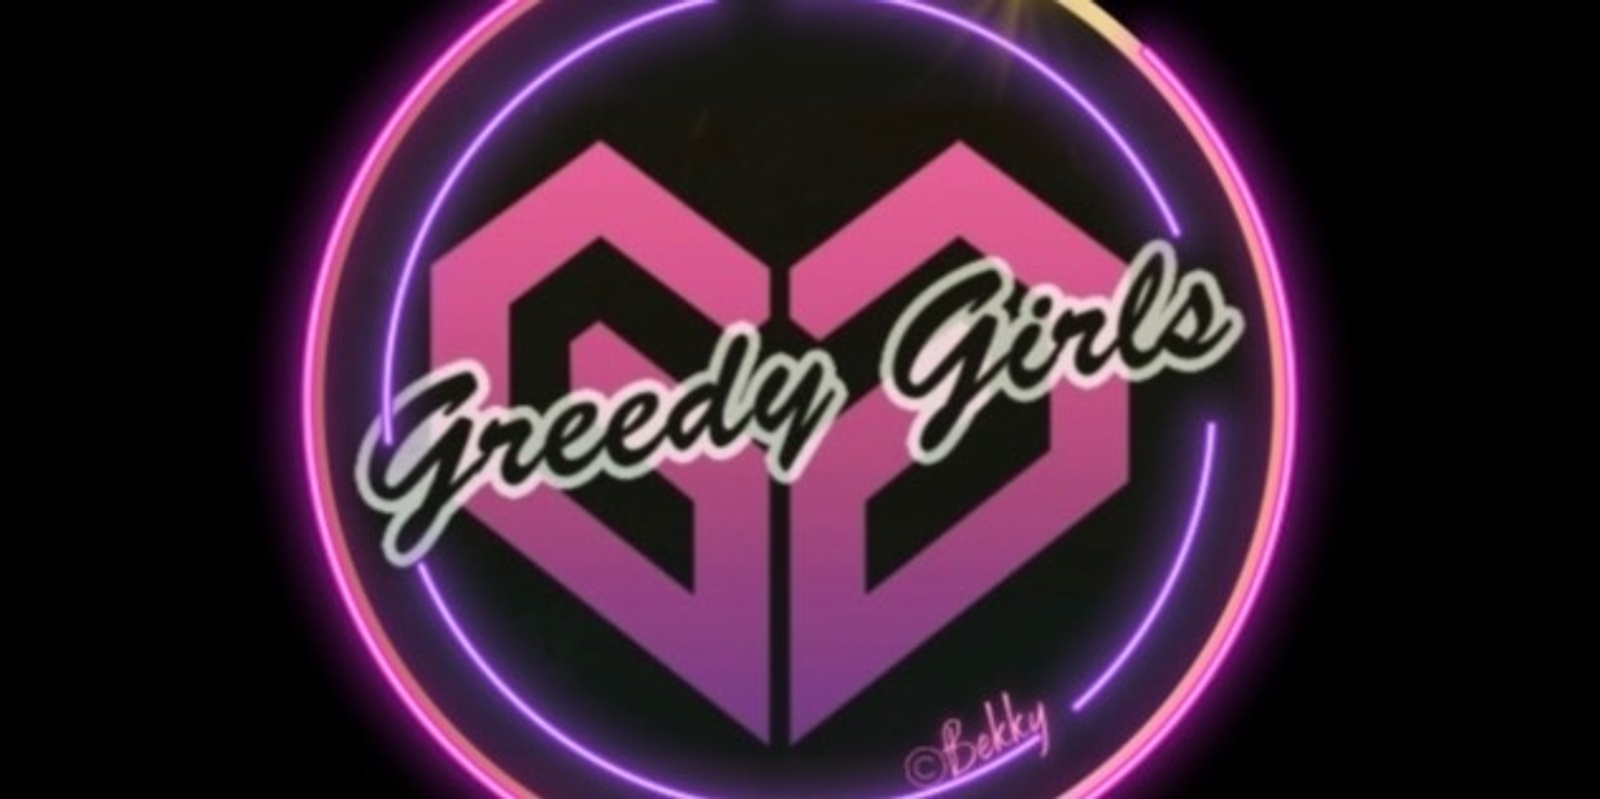 Banner image for Greedy Girls Duo Social Invite